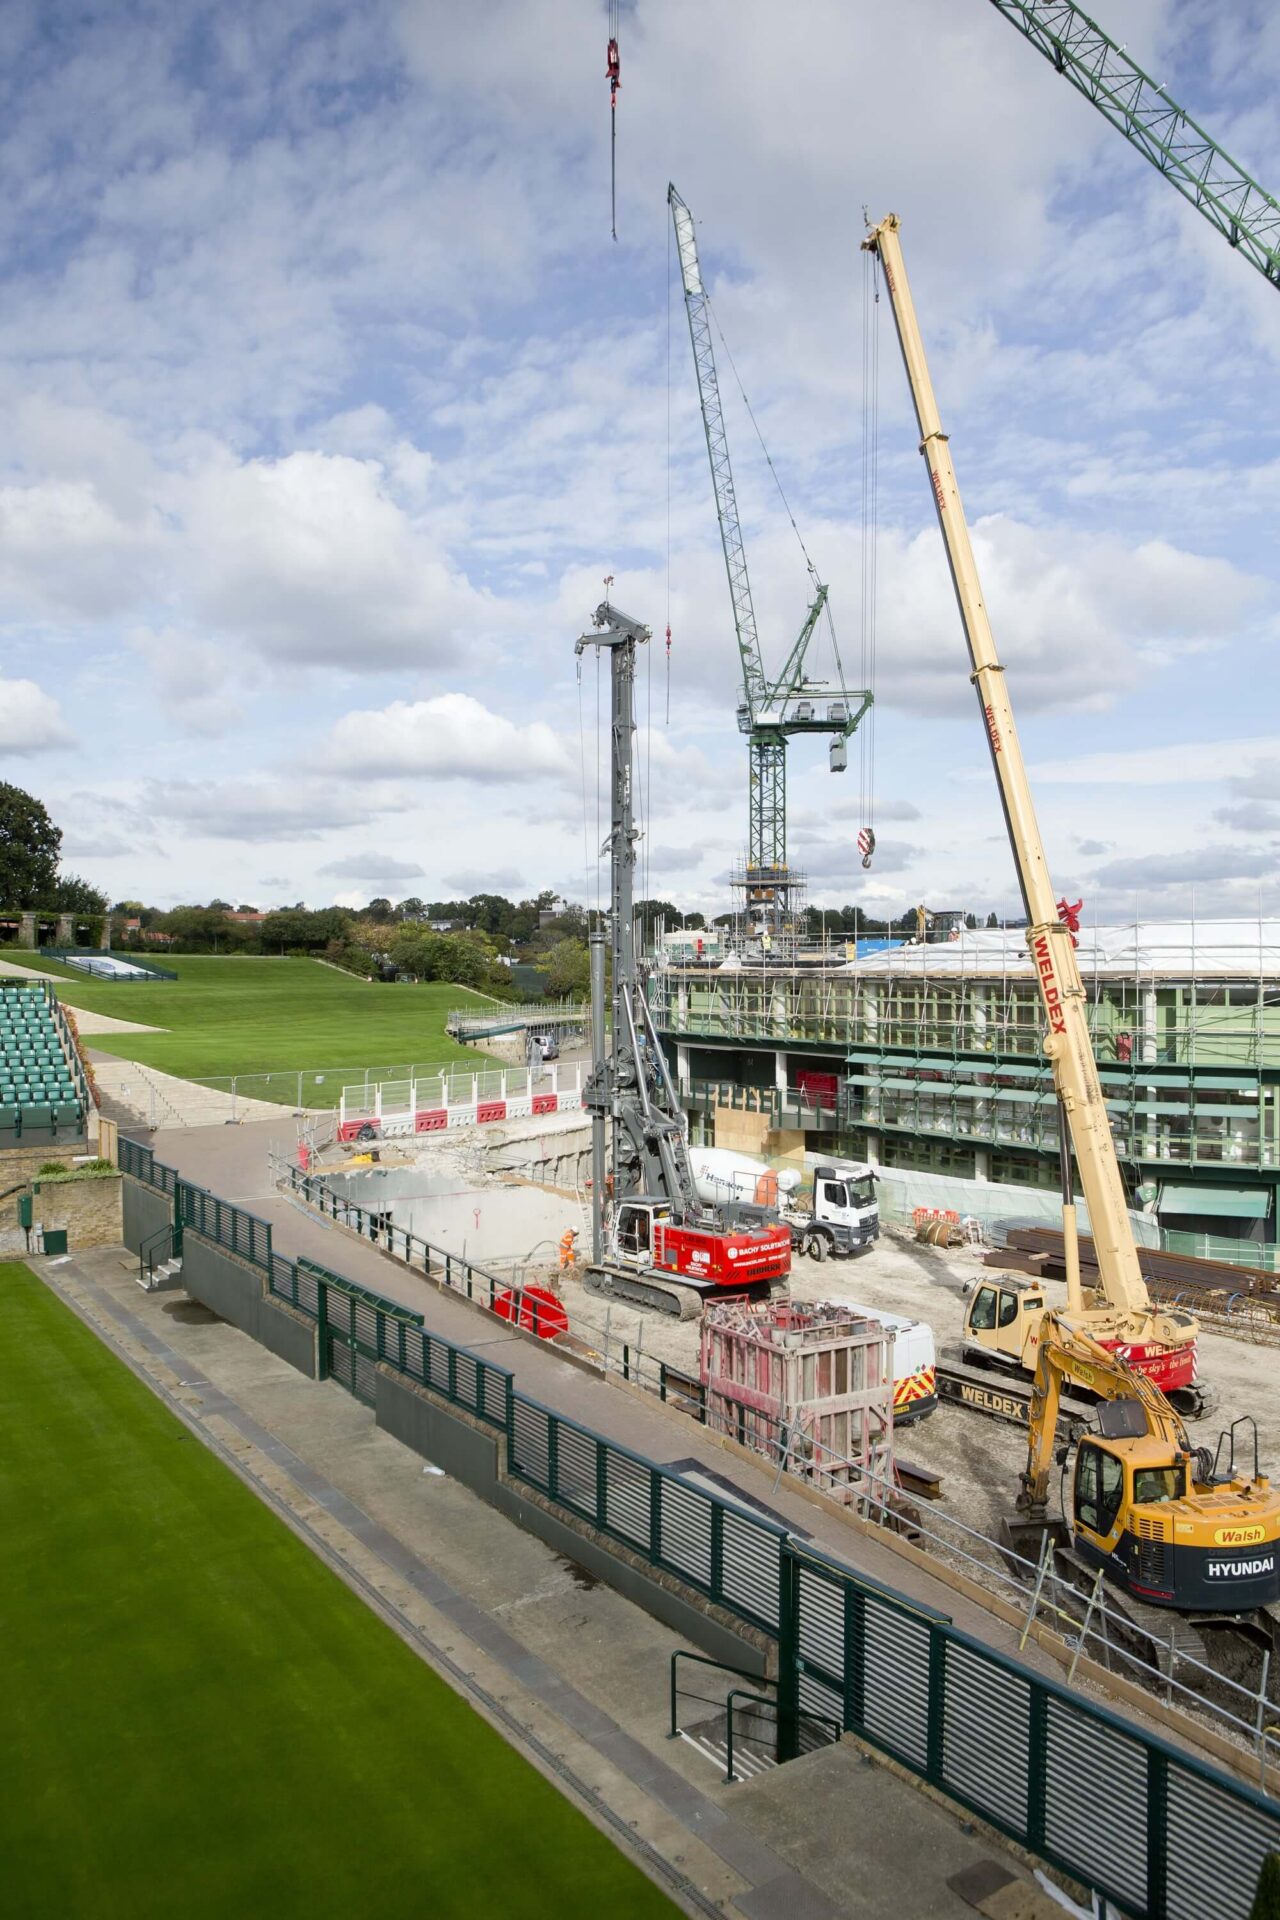 Foundations Retaining Wall Solution - CFA Piling Contiguous Wall Plunge Columns - Wimbledon AELTC (7)